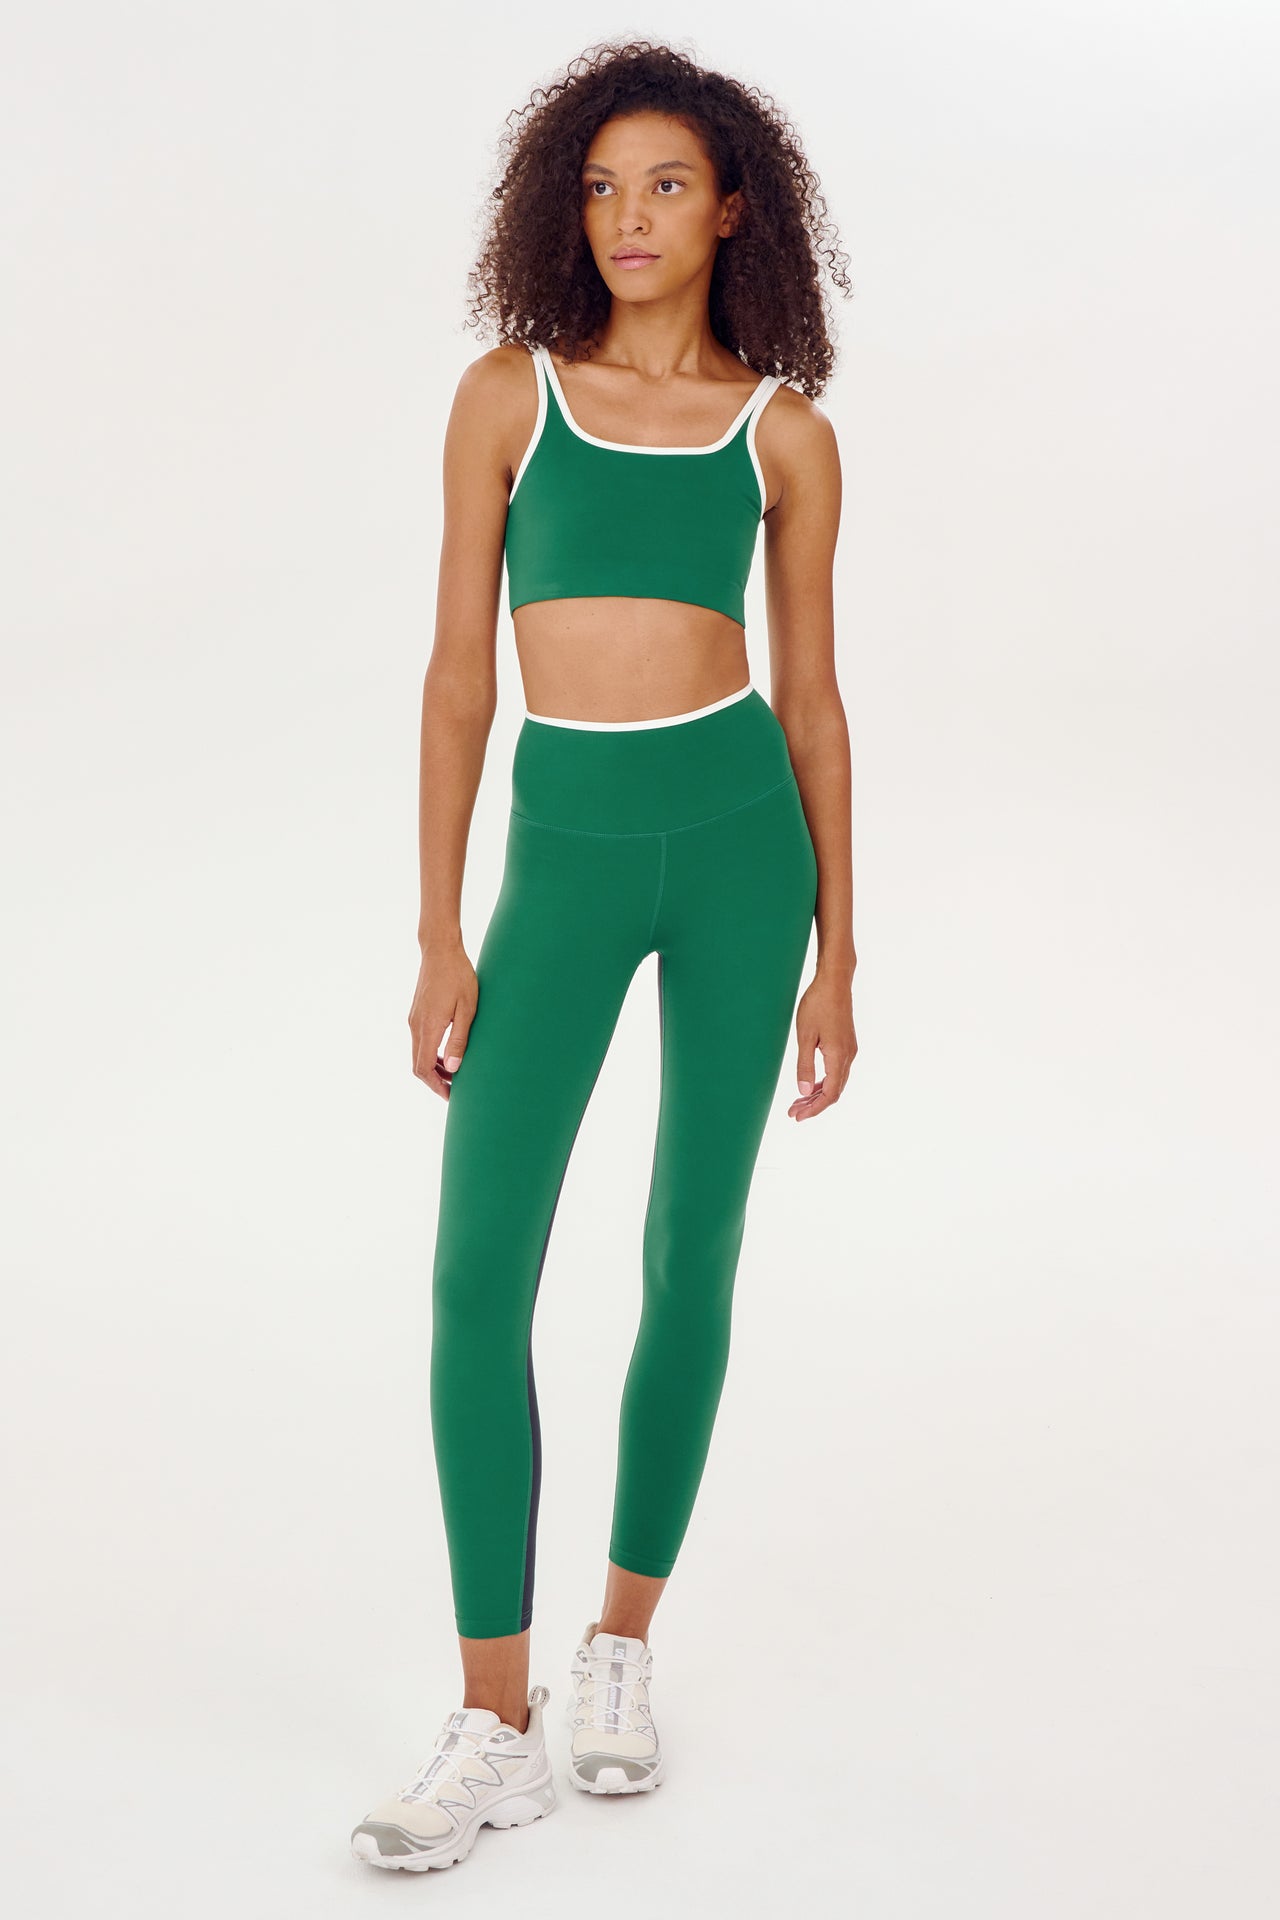 A woman wearing SPLITS59's Easton Rigor High Waist 7/8 - Arugula/White sports bra and leggings, perfect for gym workouts.